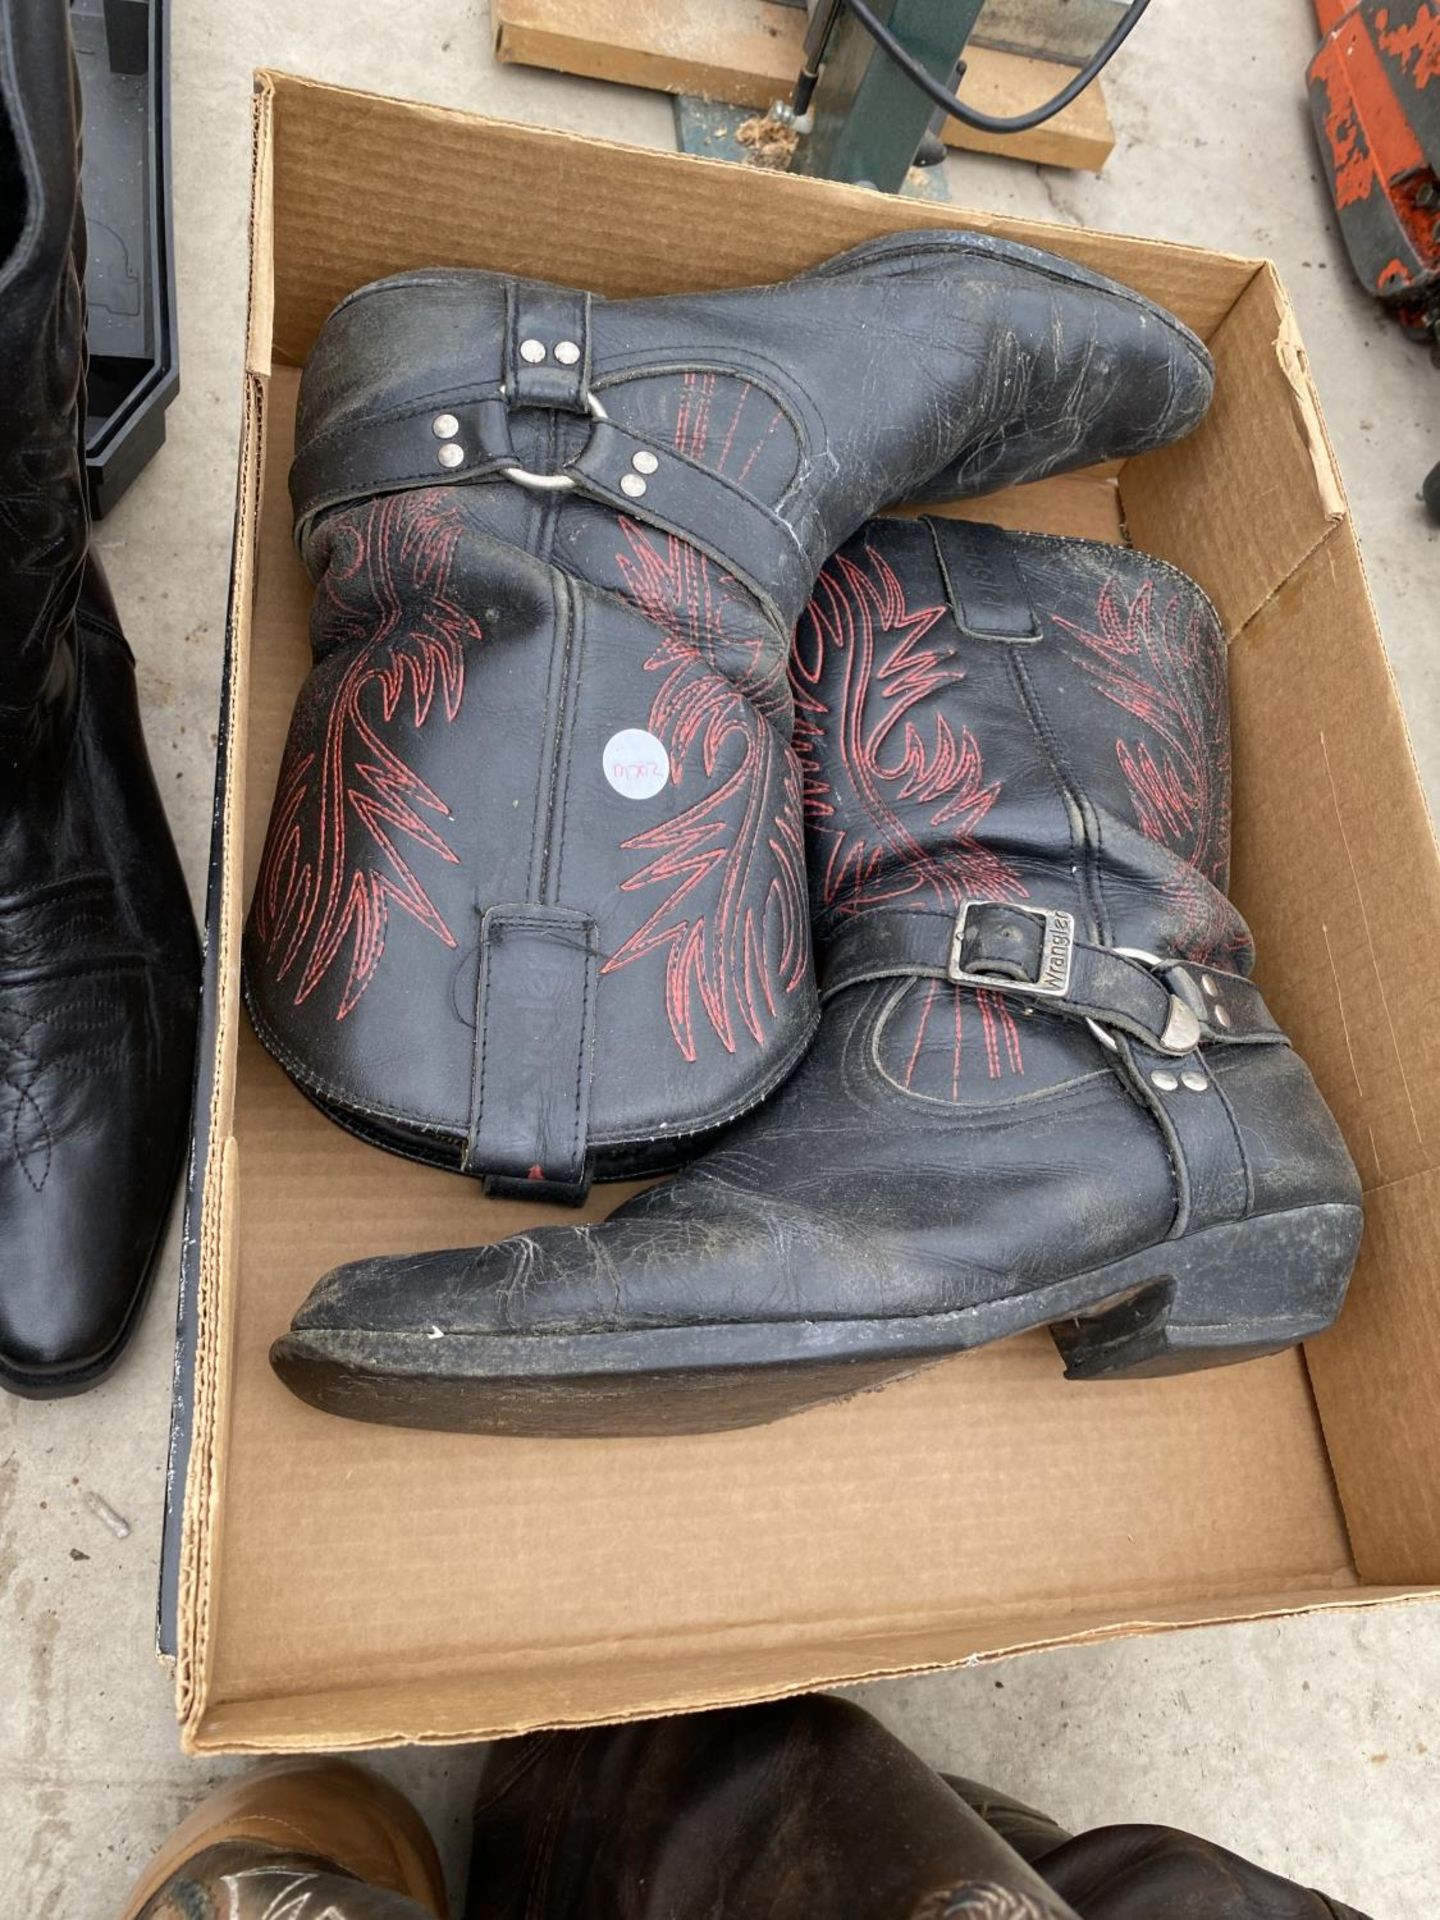 A LARGE COLLECTION OF GENTS COWBOY BOOTS FROM SIZE 10.5-12 - Image 4 of 5